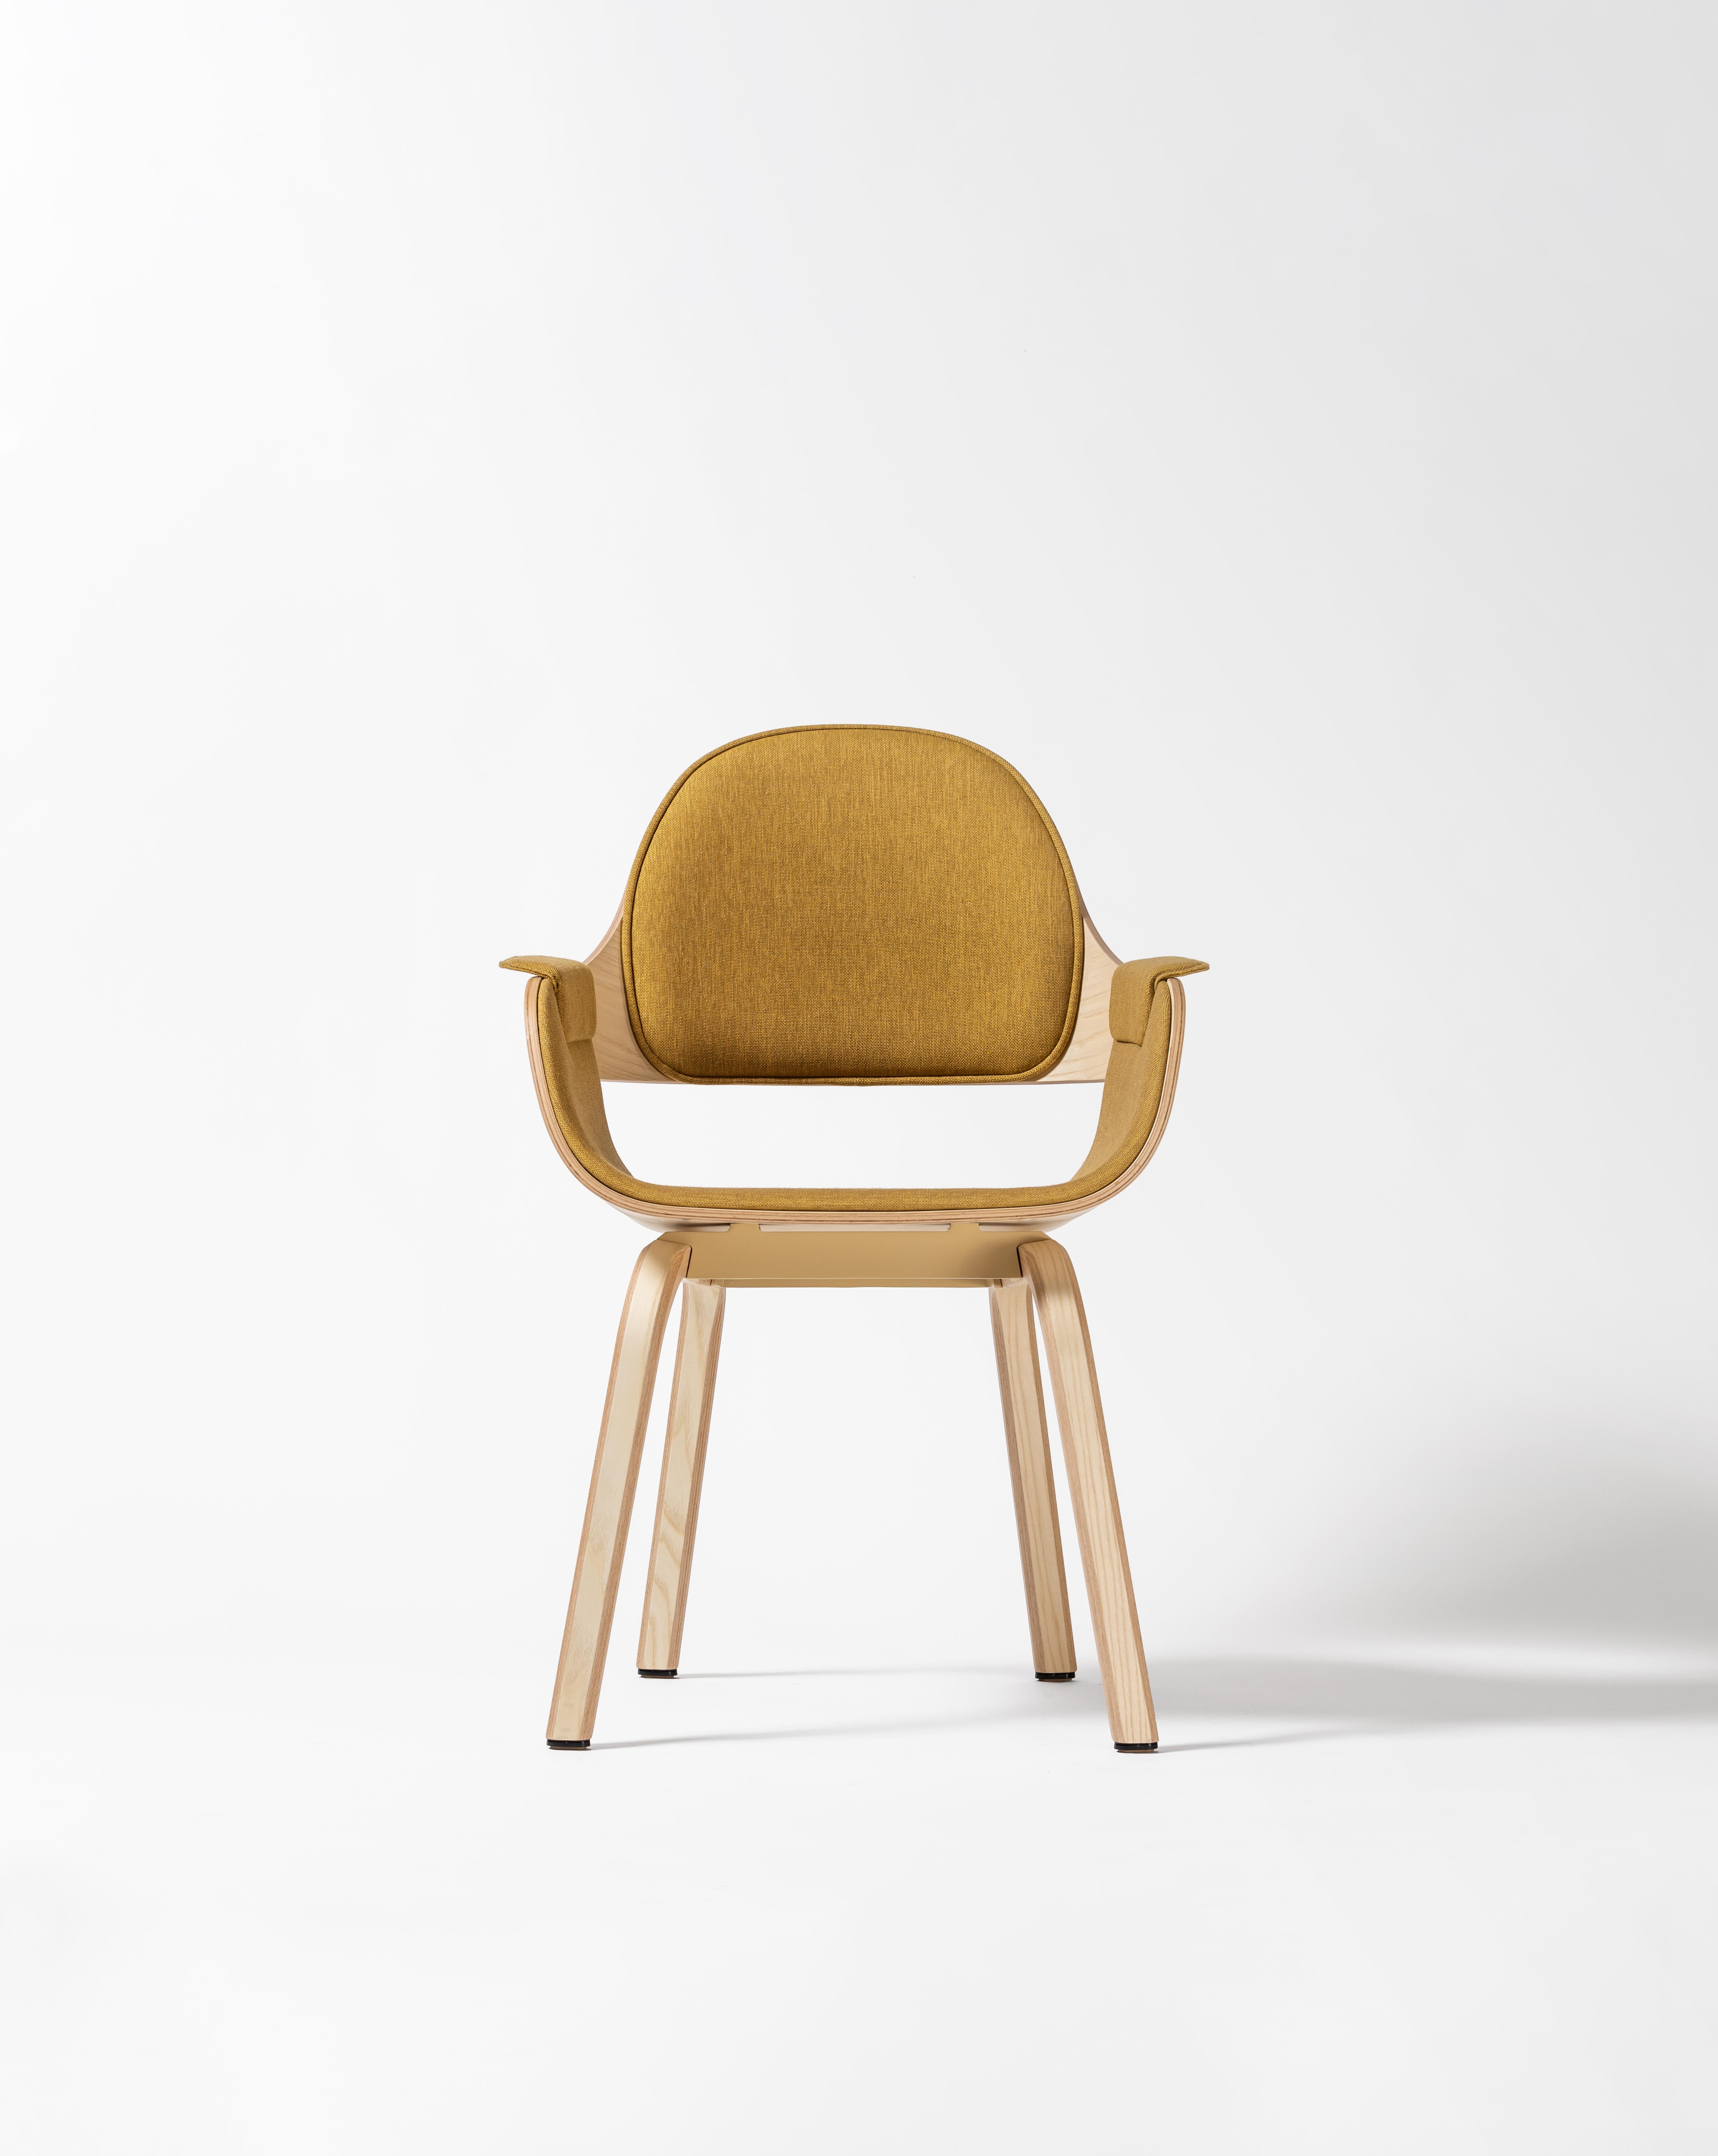 Wooden legs showtime chair by Jaime Hayon 
Dimensions: D 55 x W 55 x H 86 cm 
Materials: powder coated steel or aluminium structure. Legs, seat and backrest in plywood with exteriors in natural ash, walnut or ash stained black. Metallic decorative